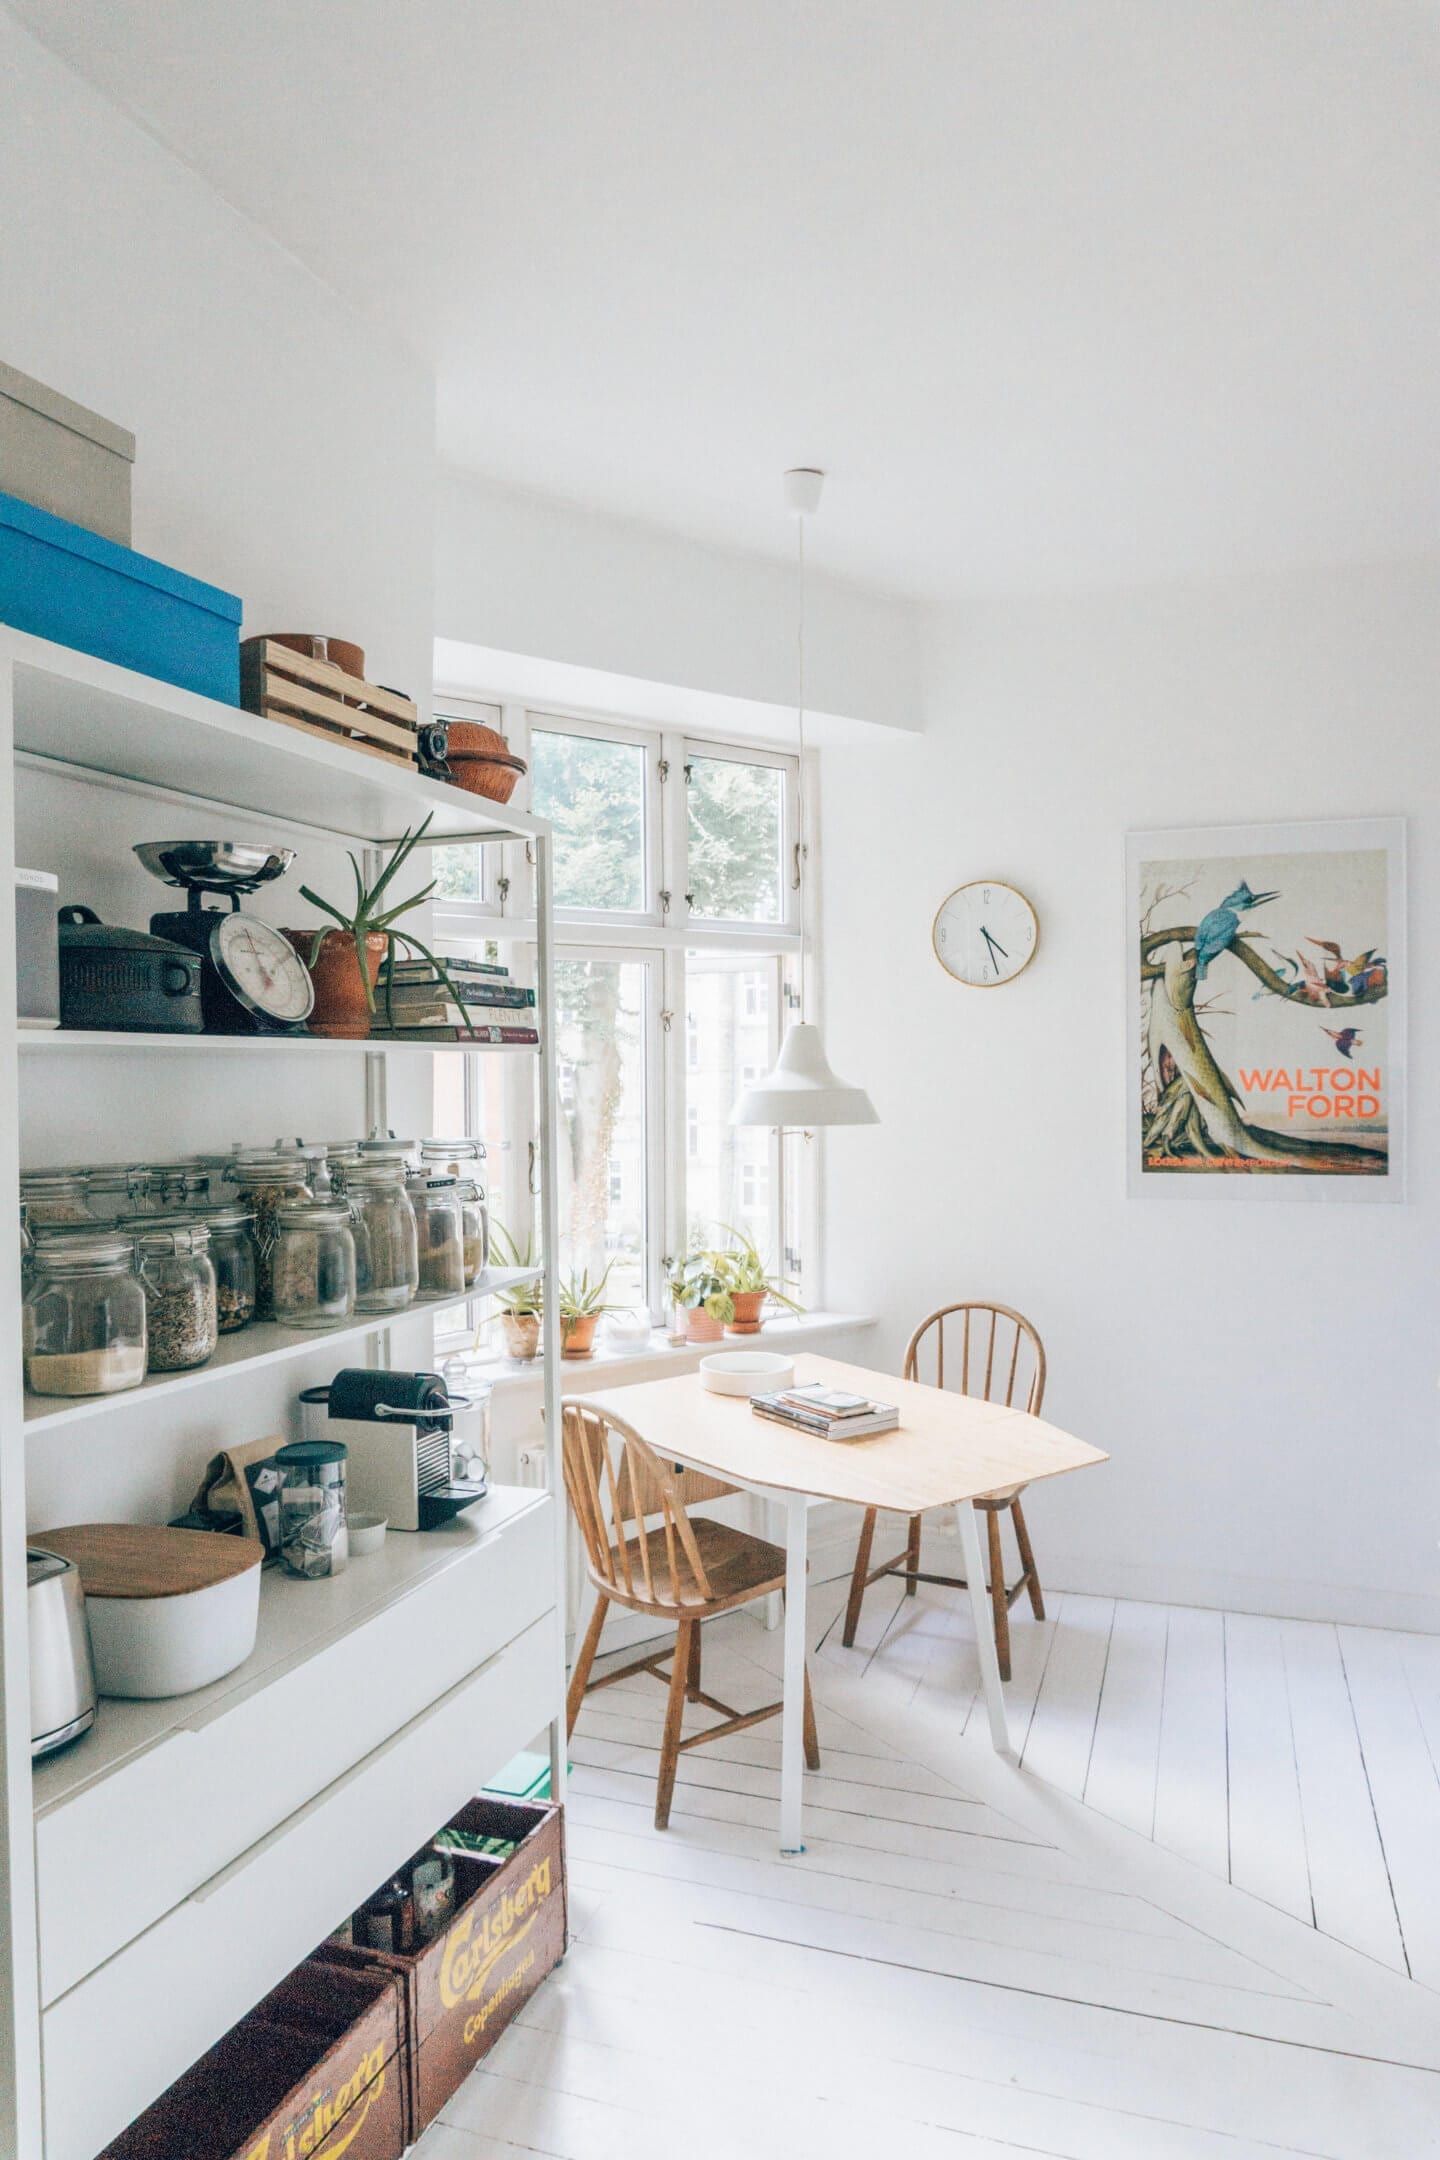 The kitchen table and pantry of our Copenhagen Airbnb